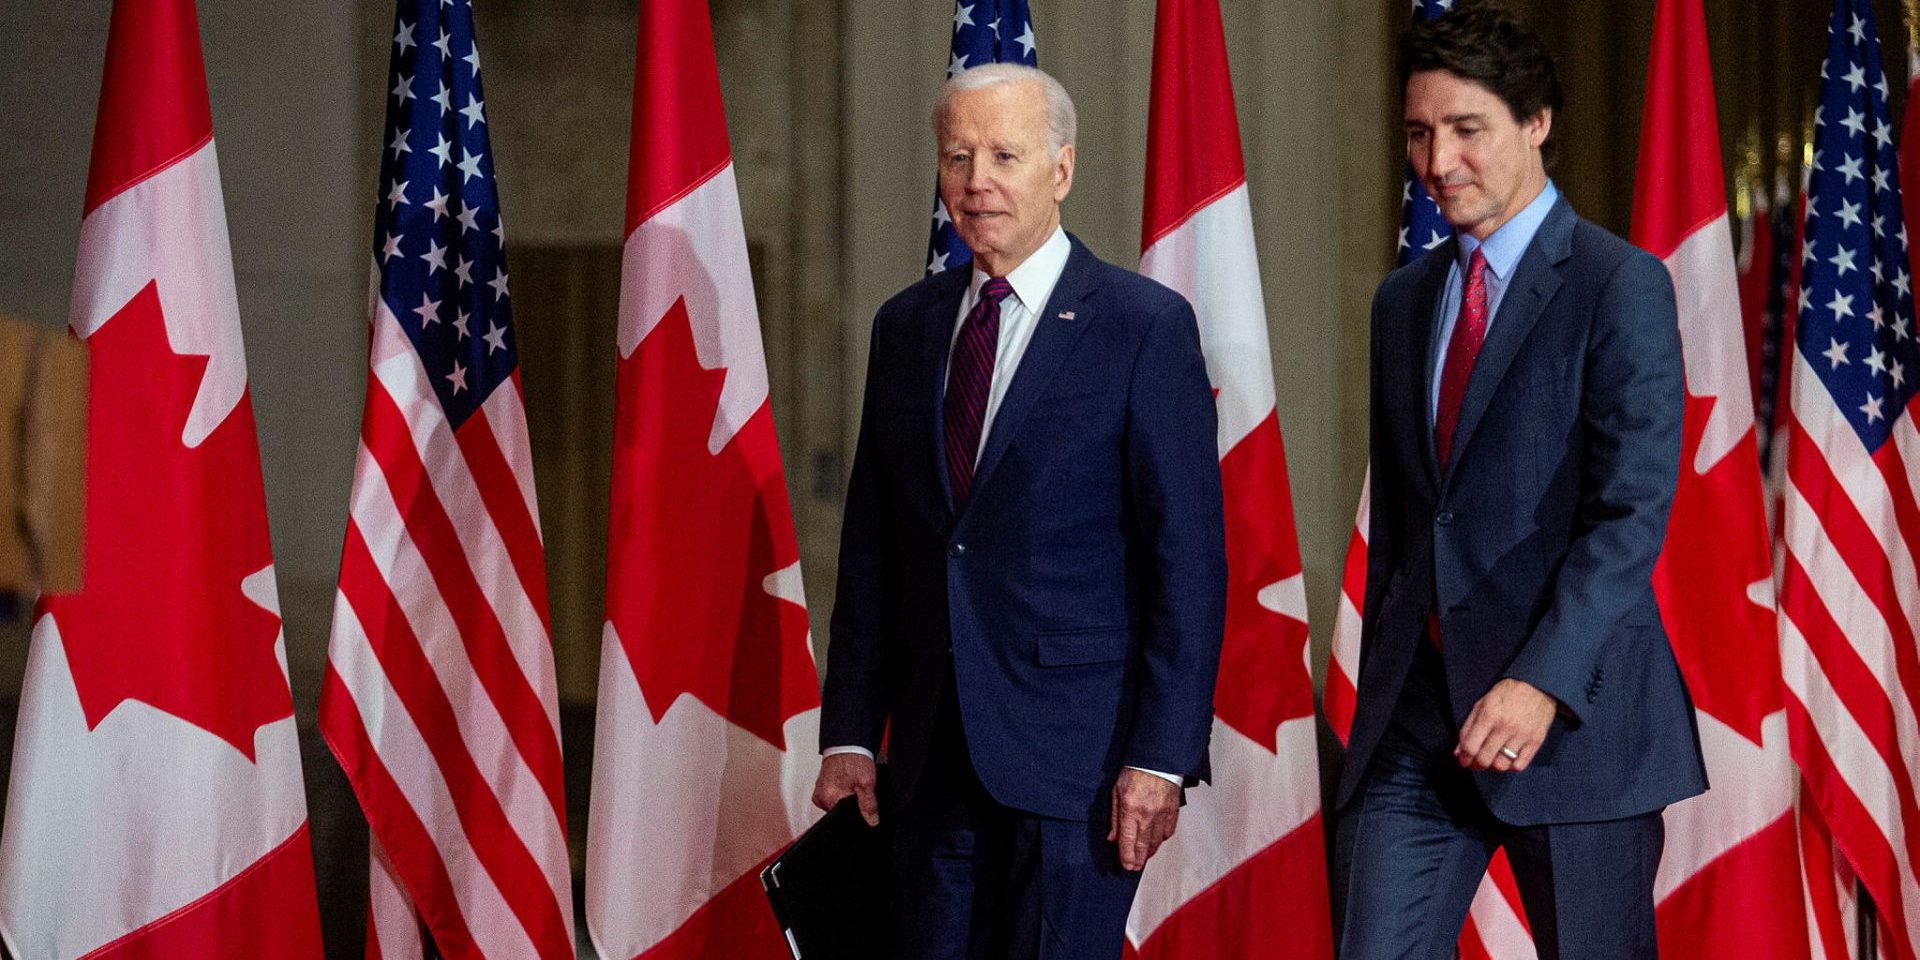 Prime Minister Justin Trudeau and President Joe Biden arrive for a joint press conference  at the Sir John A. Macdonald Building in Ottawa on March 24, 2023. Andrew Meade